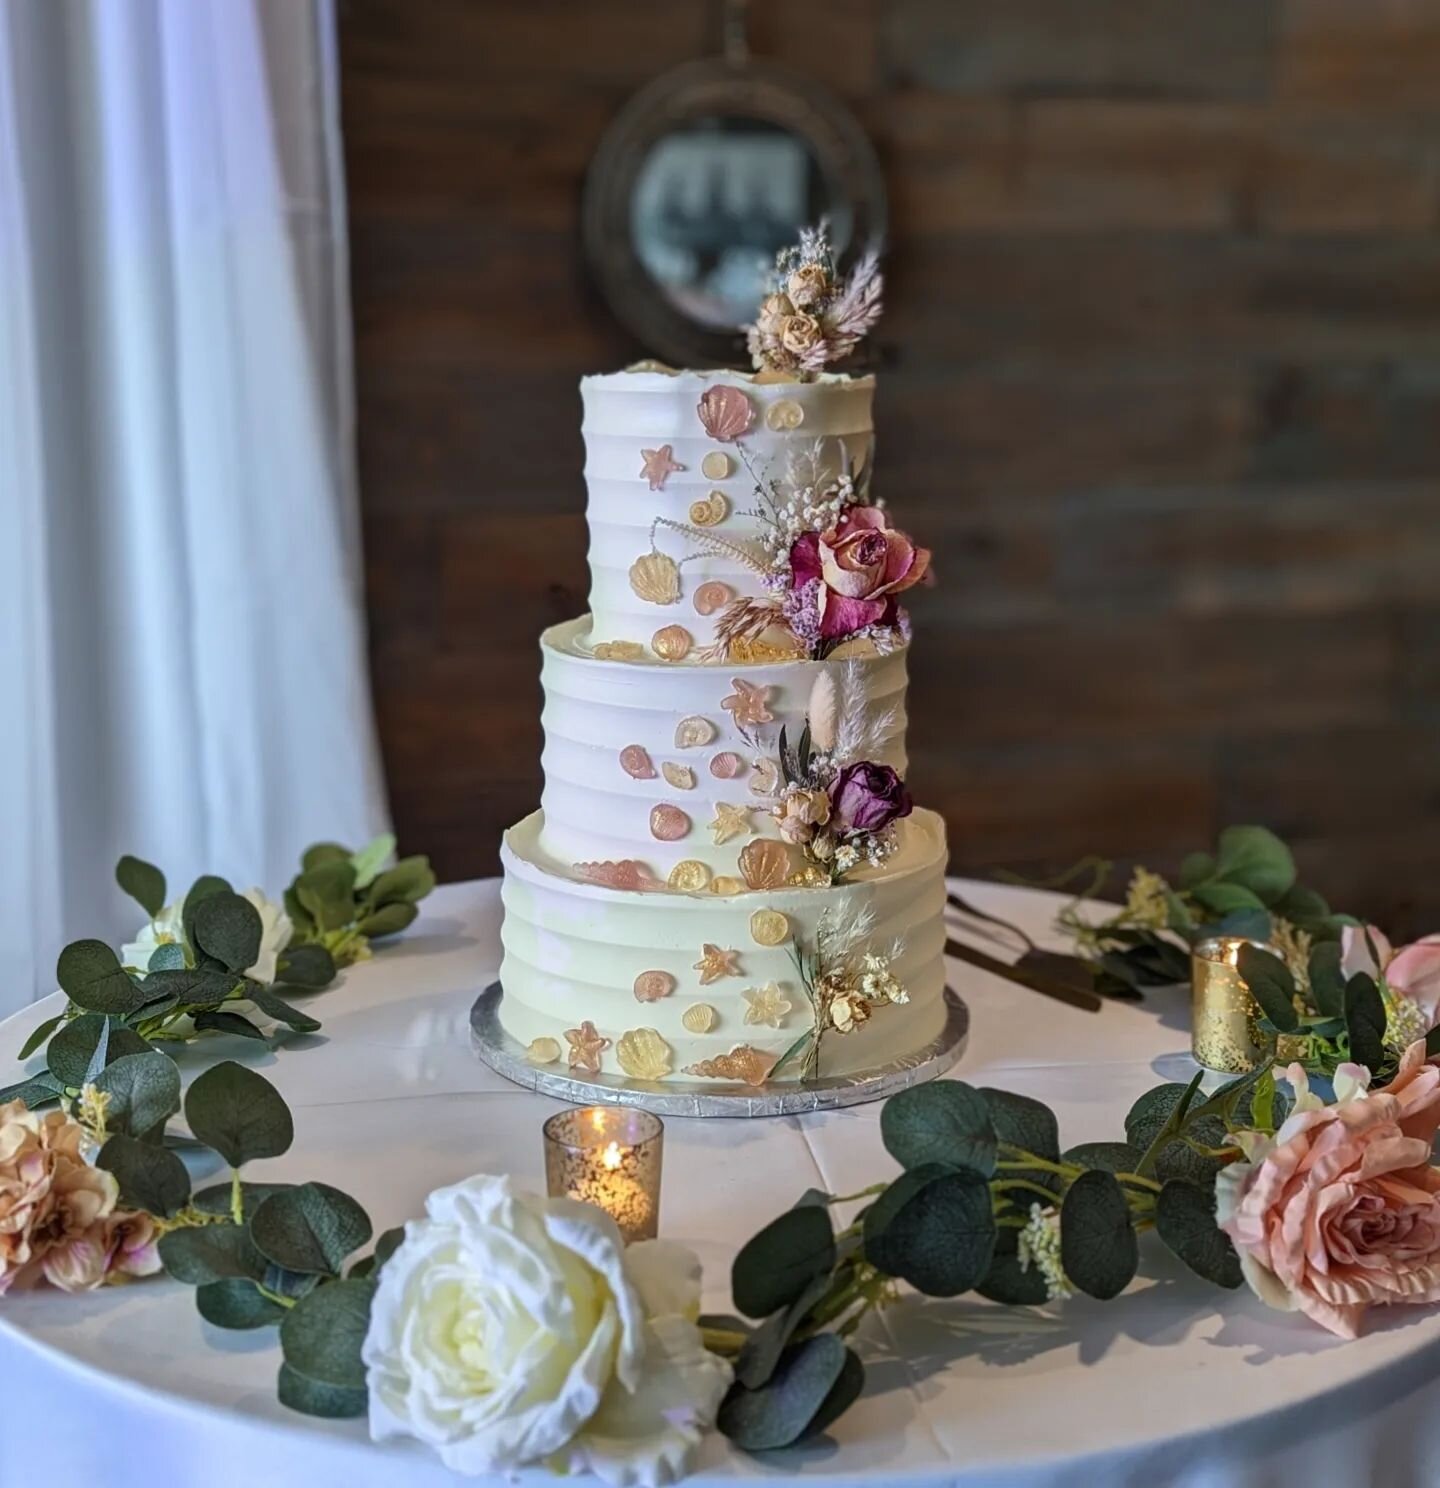 A beautiful wedding cake made and delivered during hurricane Fiona! I think it was a full team effort that made this happen for an absolutely lovely couple! 💗 Wishing them a lifetime of happiness and love! 💗
✨
Always a pleasure to work with @beauti